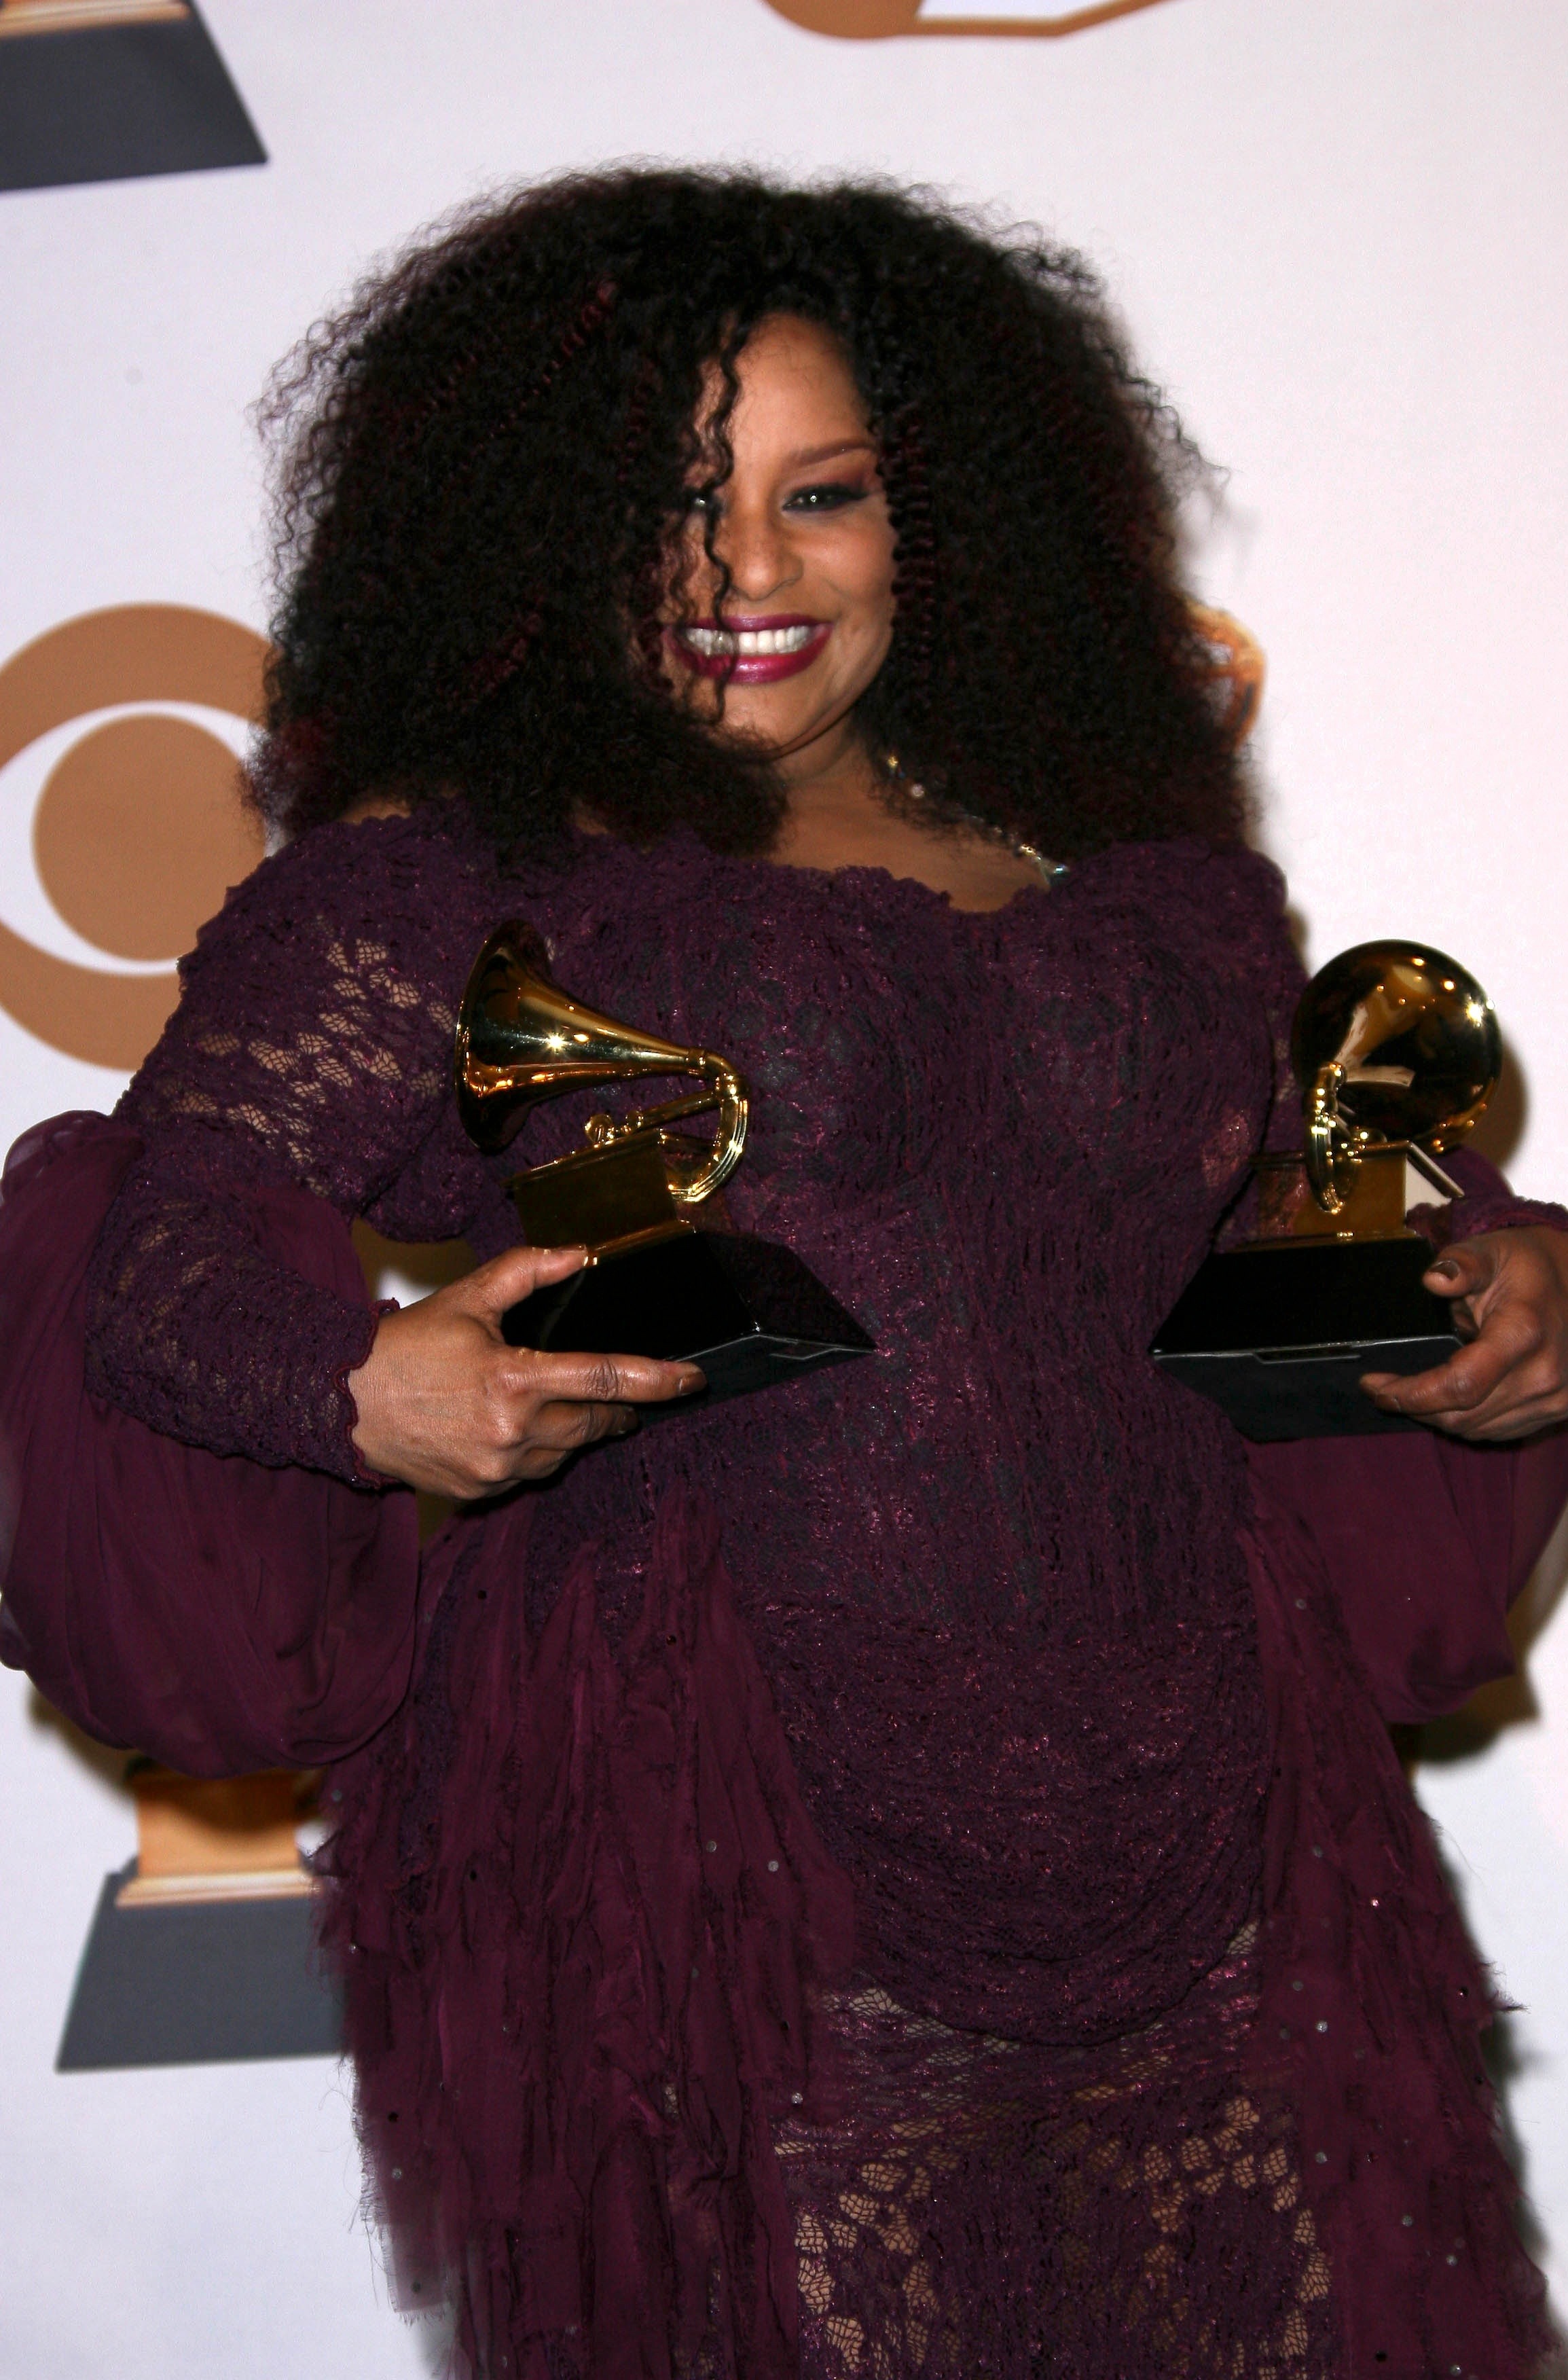 Chaka's career spans an incredible five decades